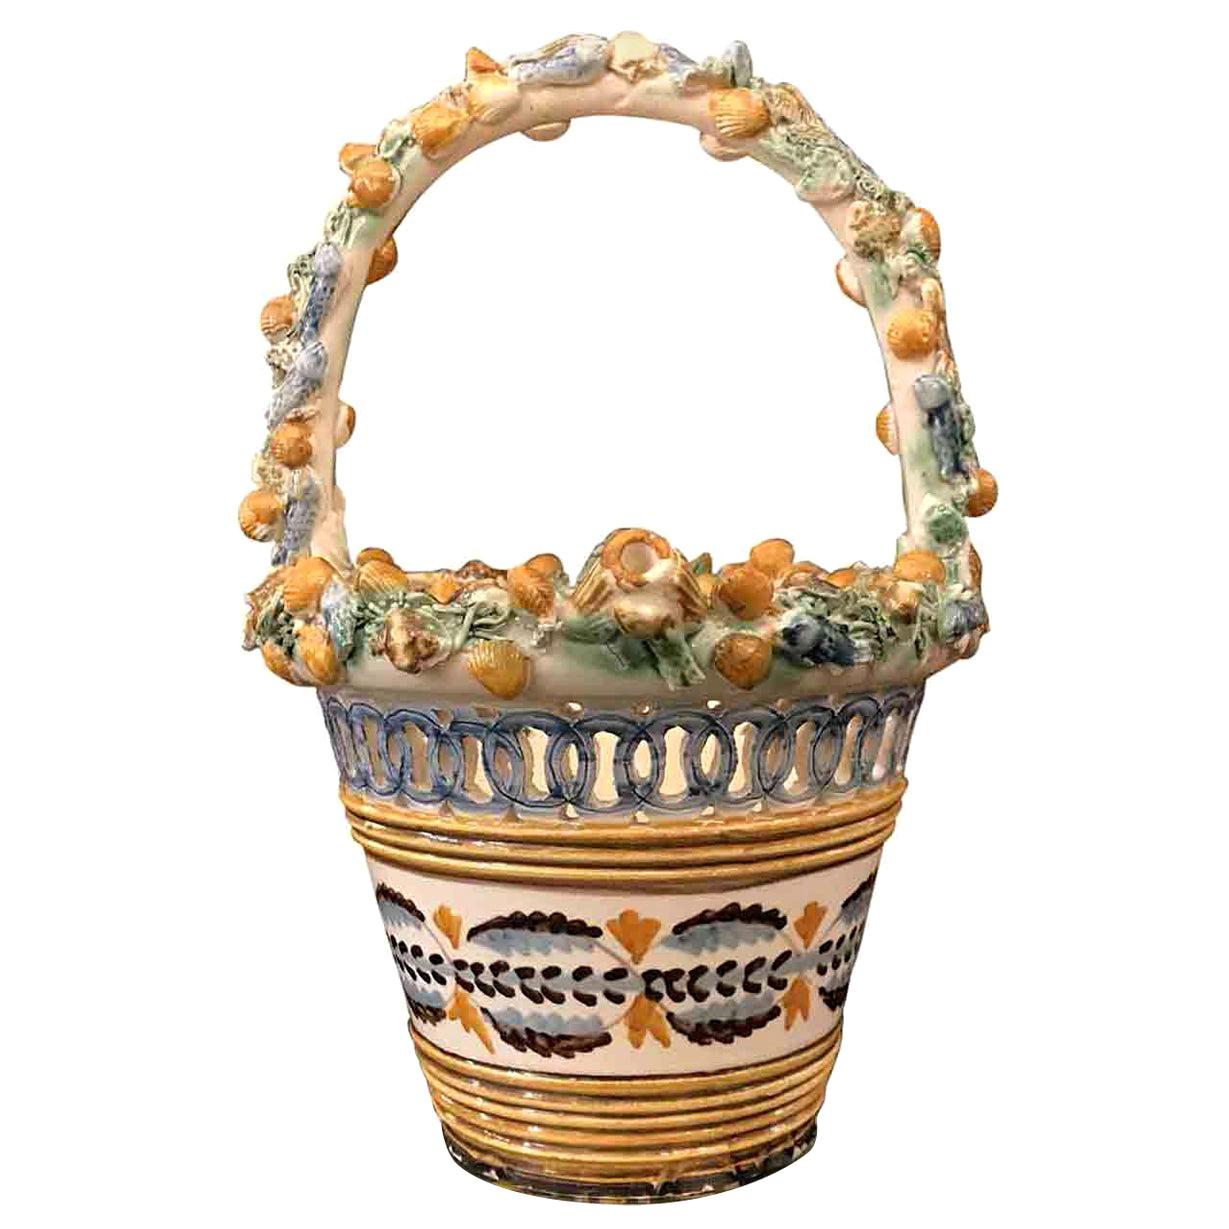 20th Century Italian Tuscan Vase Basket with Fishes Shells